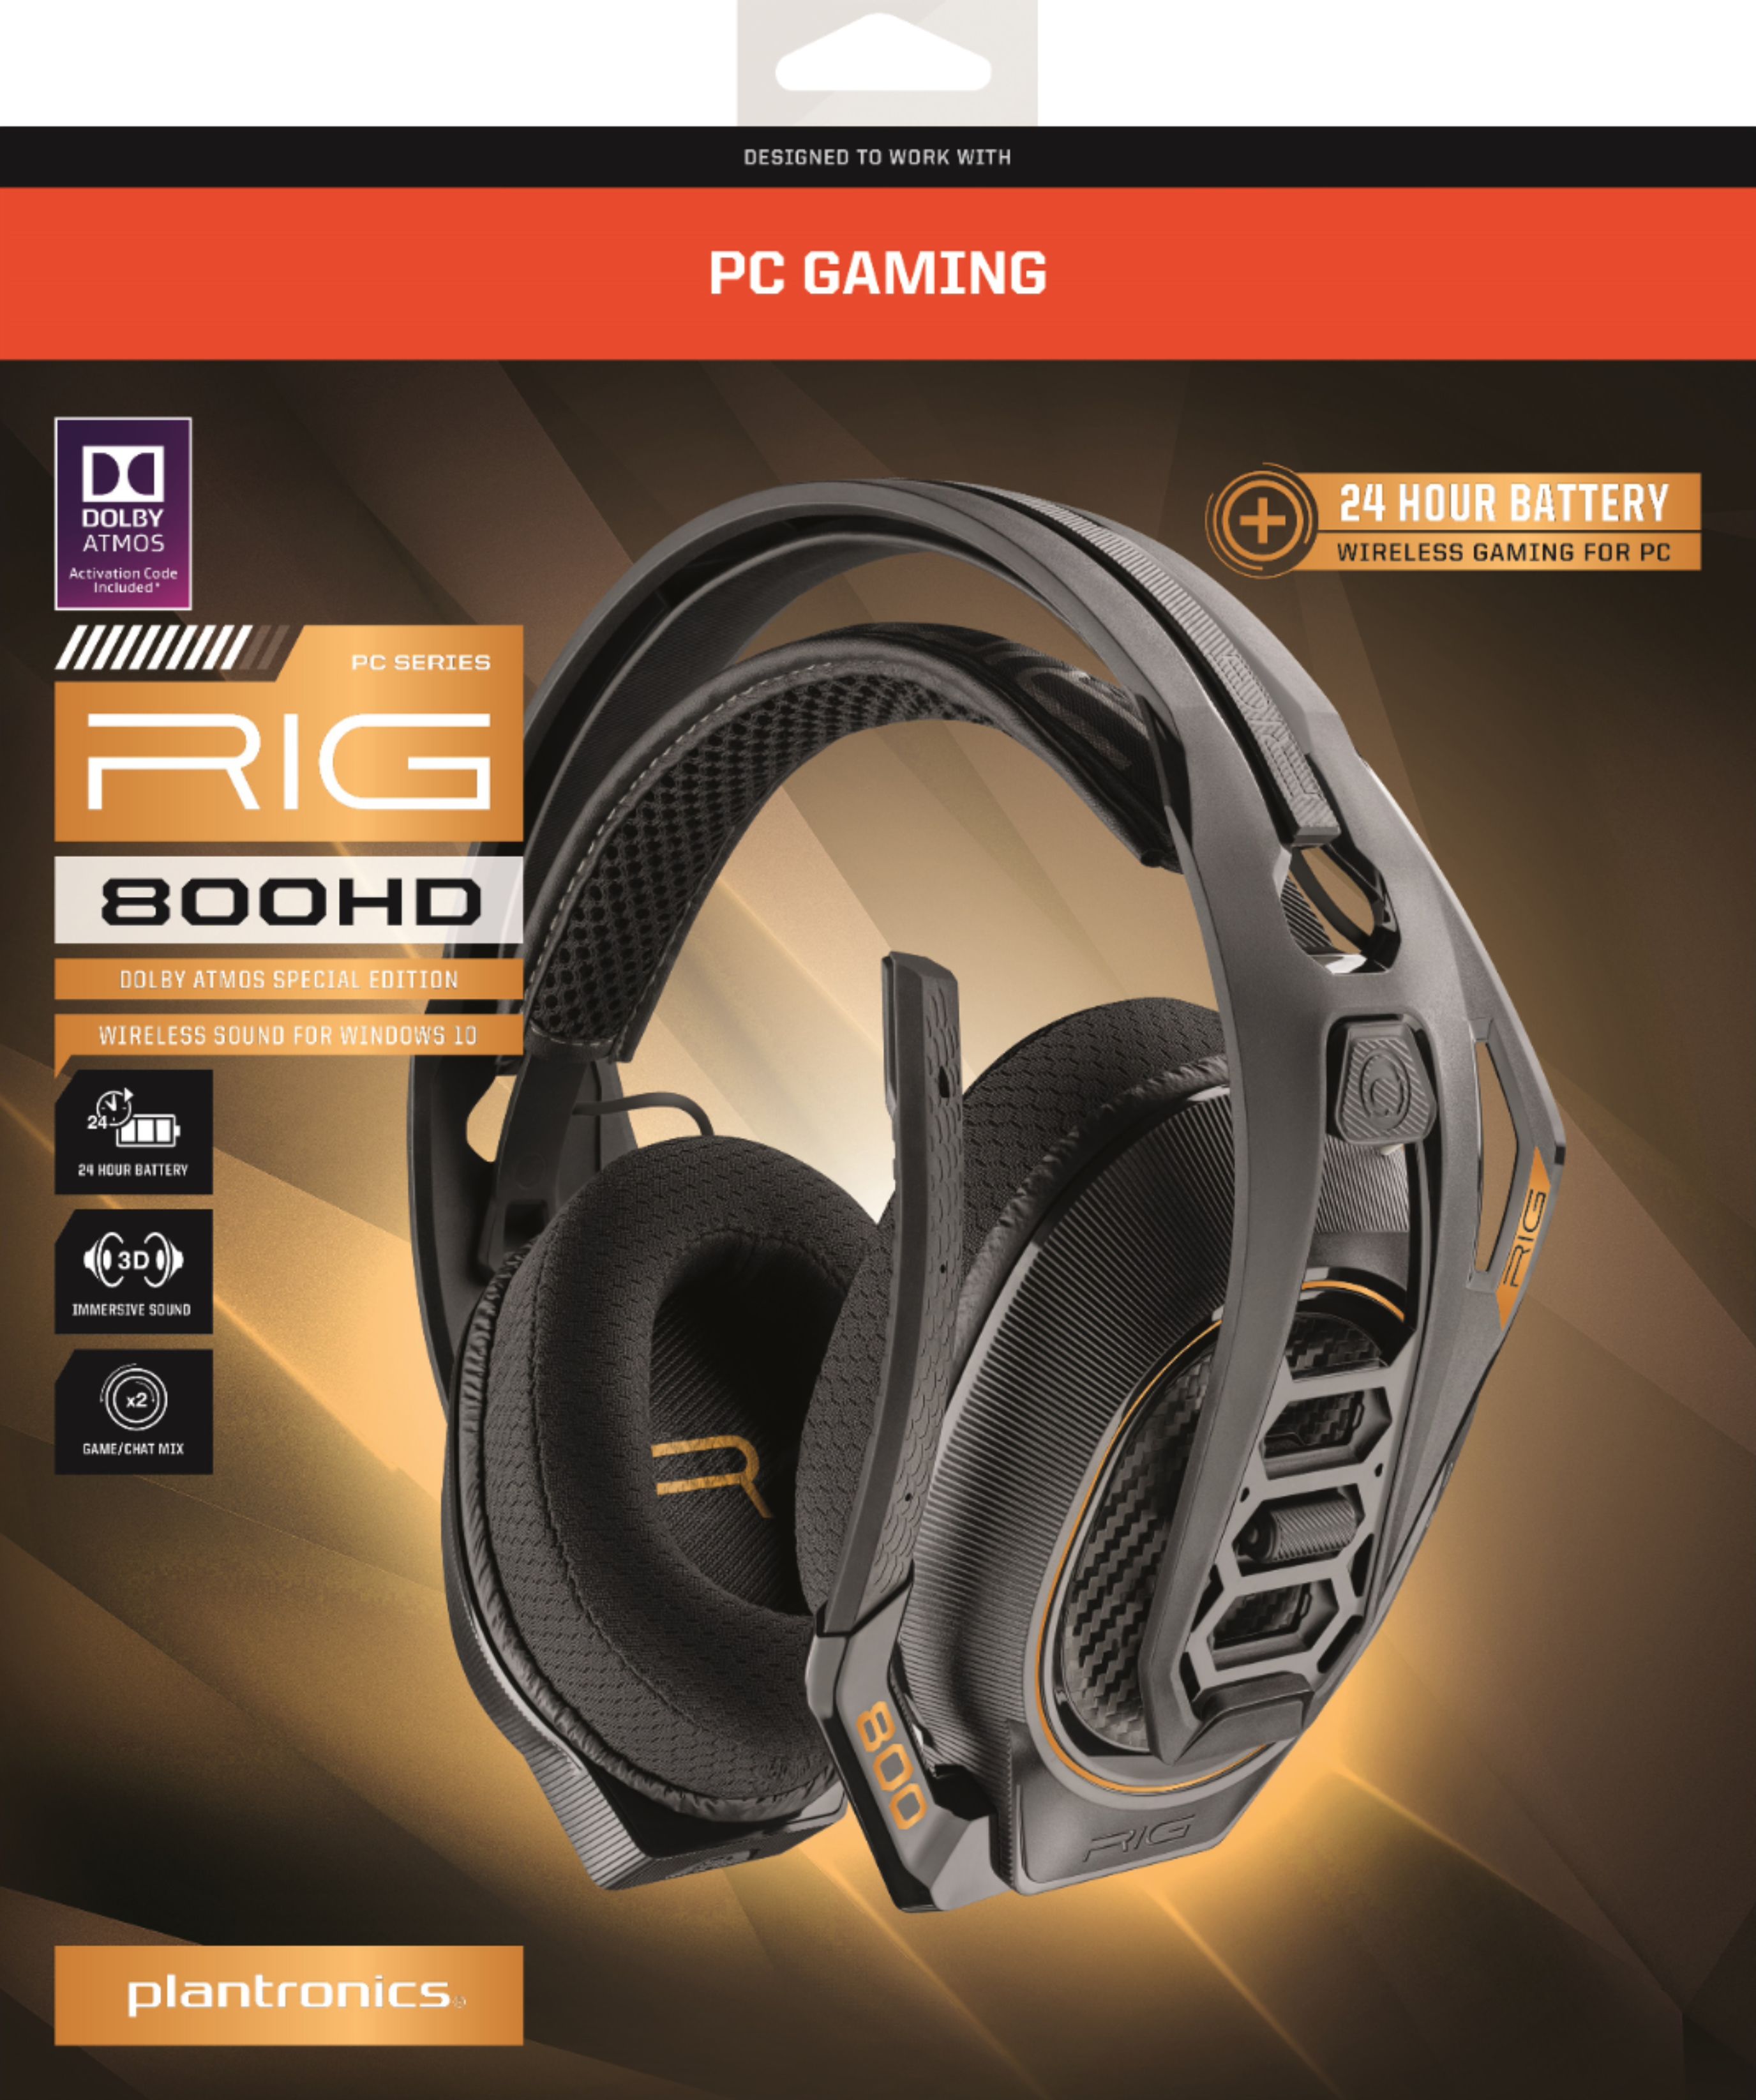 plantronics rig 800hd wireless dolby atmos gaming headset for pc